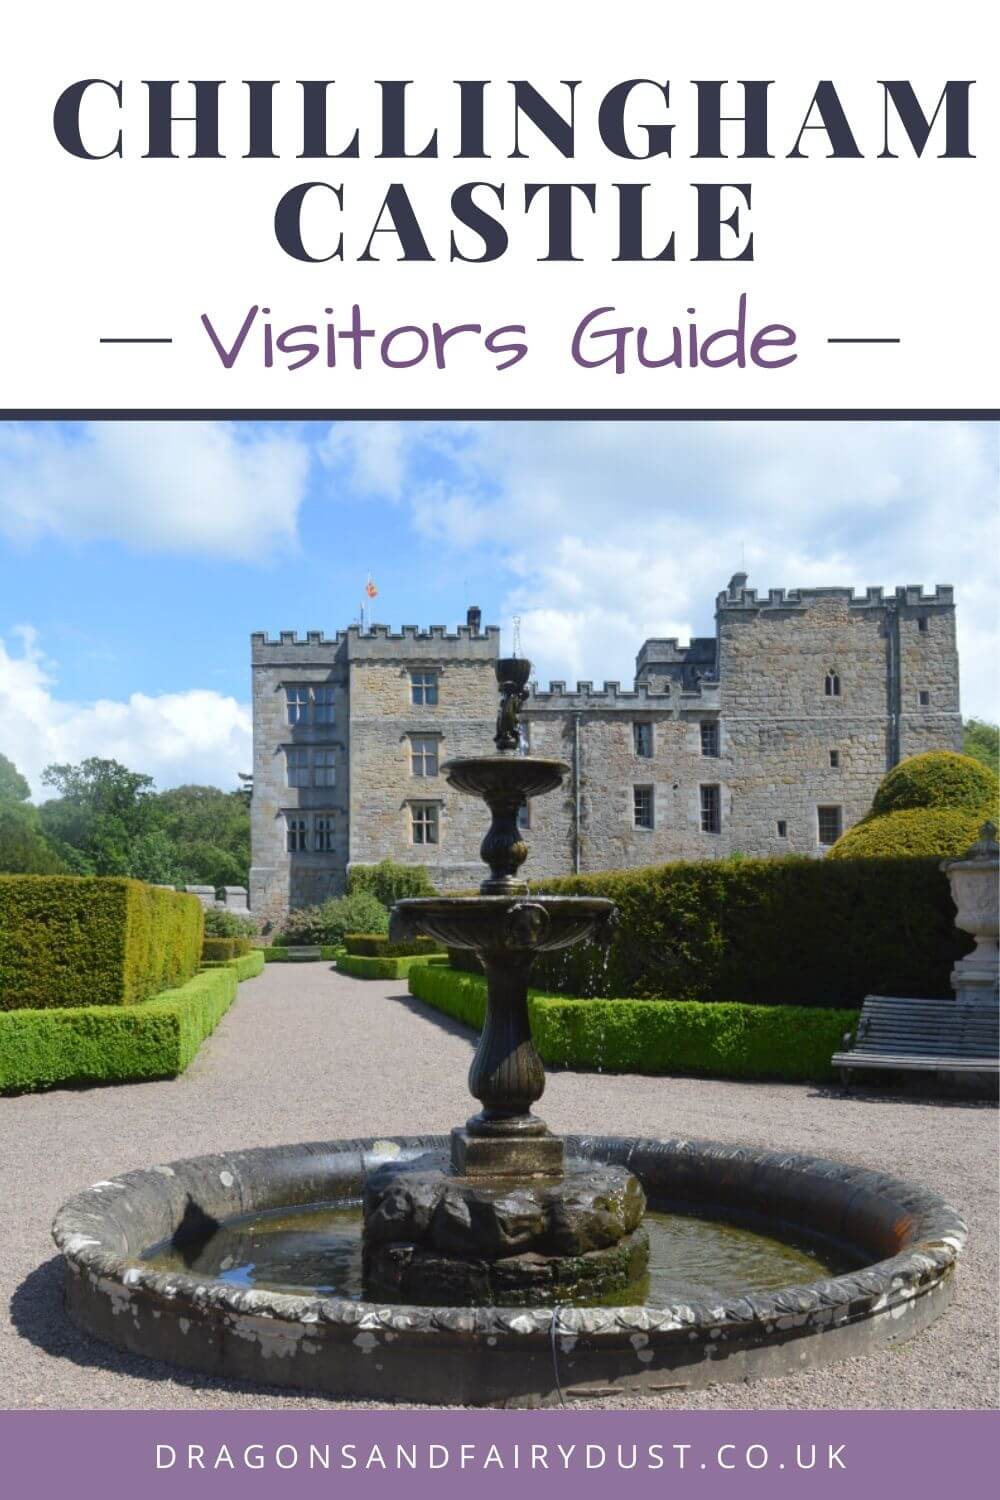 A visitor's guide to Chillingham Castle, Northumberland. One of the most haunted castles in Britain.